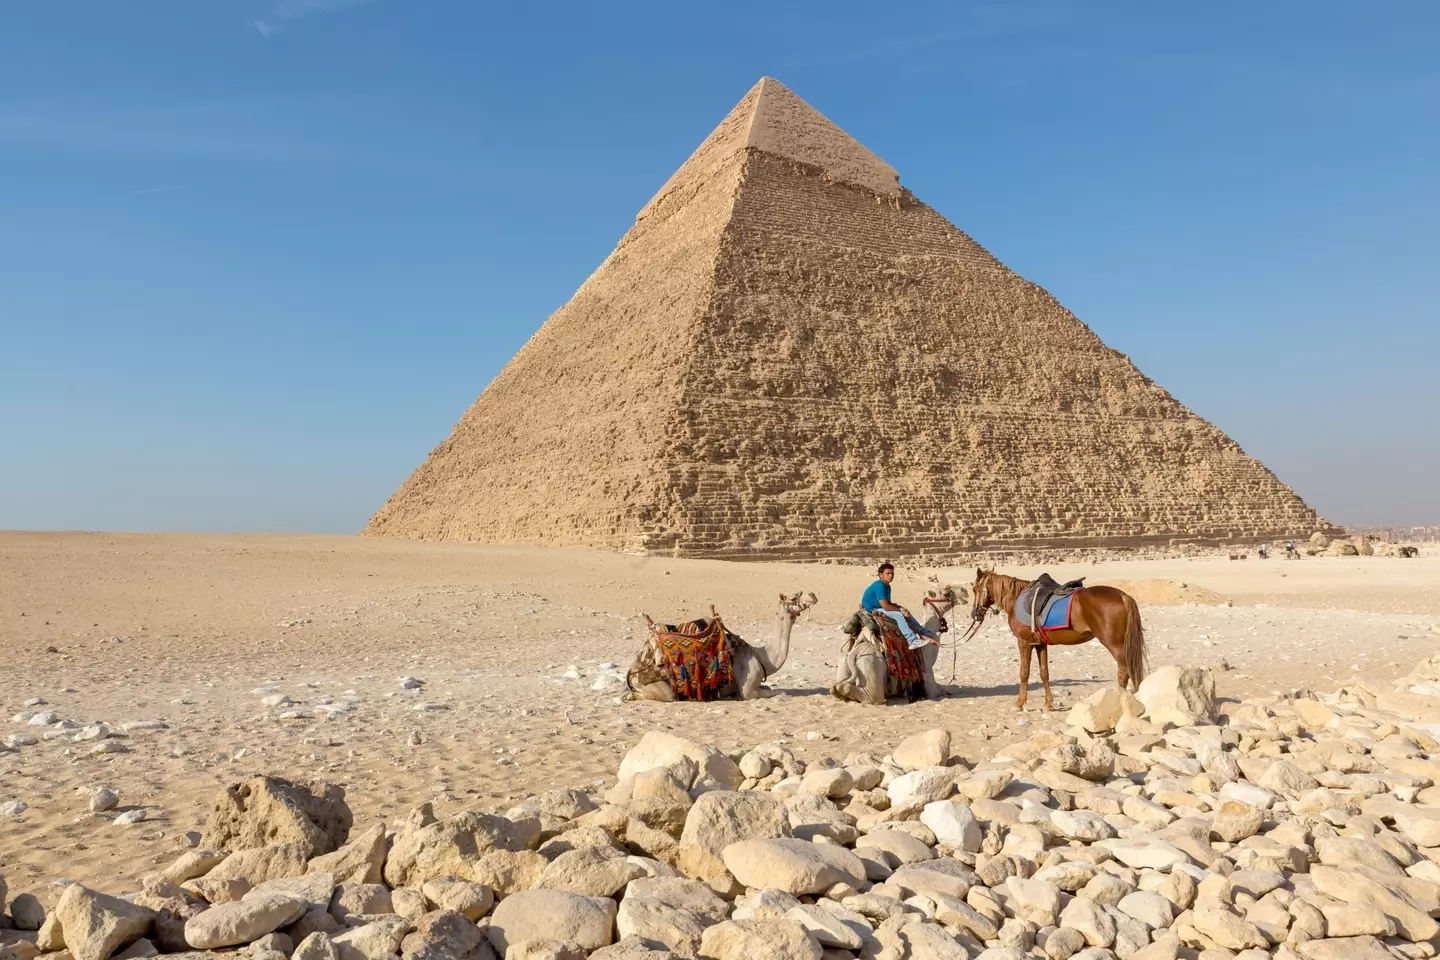 The Pyramids of Giza aren't as remote as many people think.